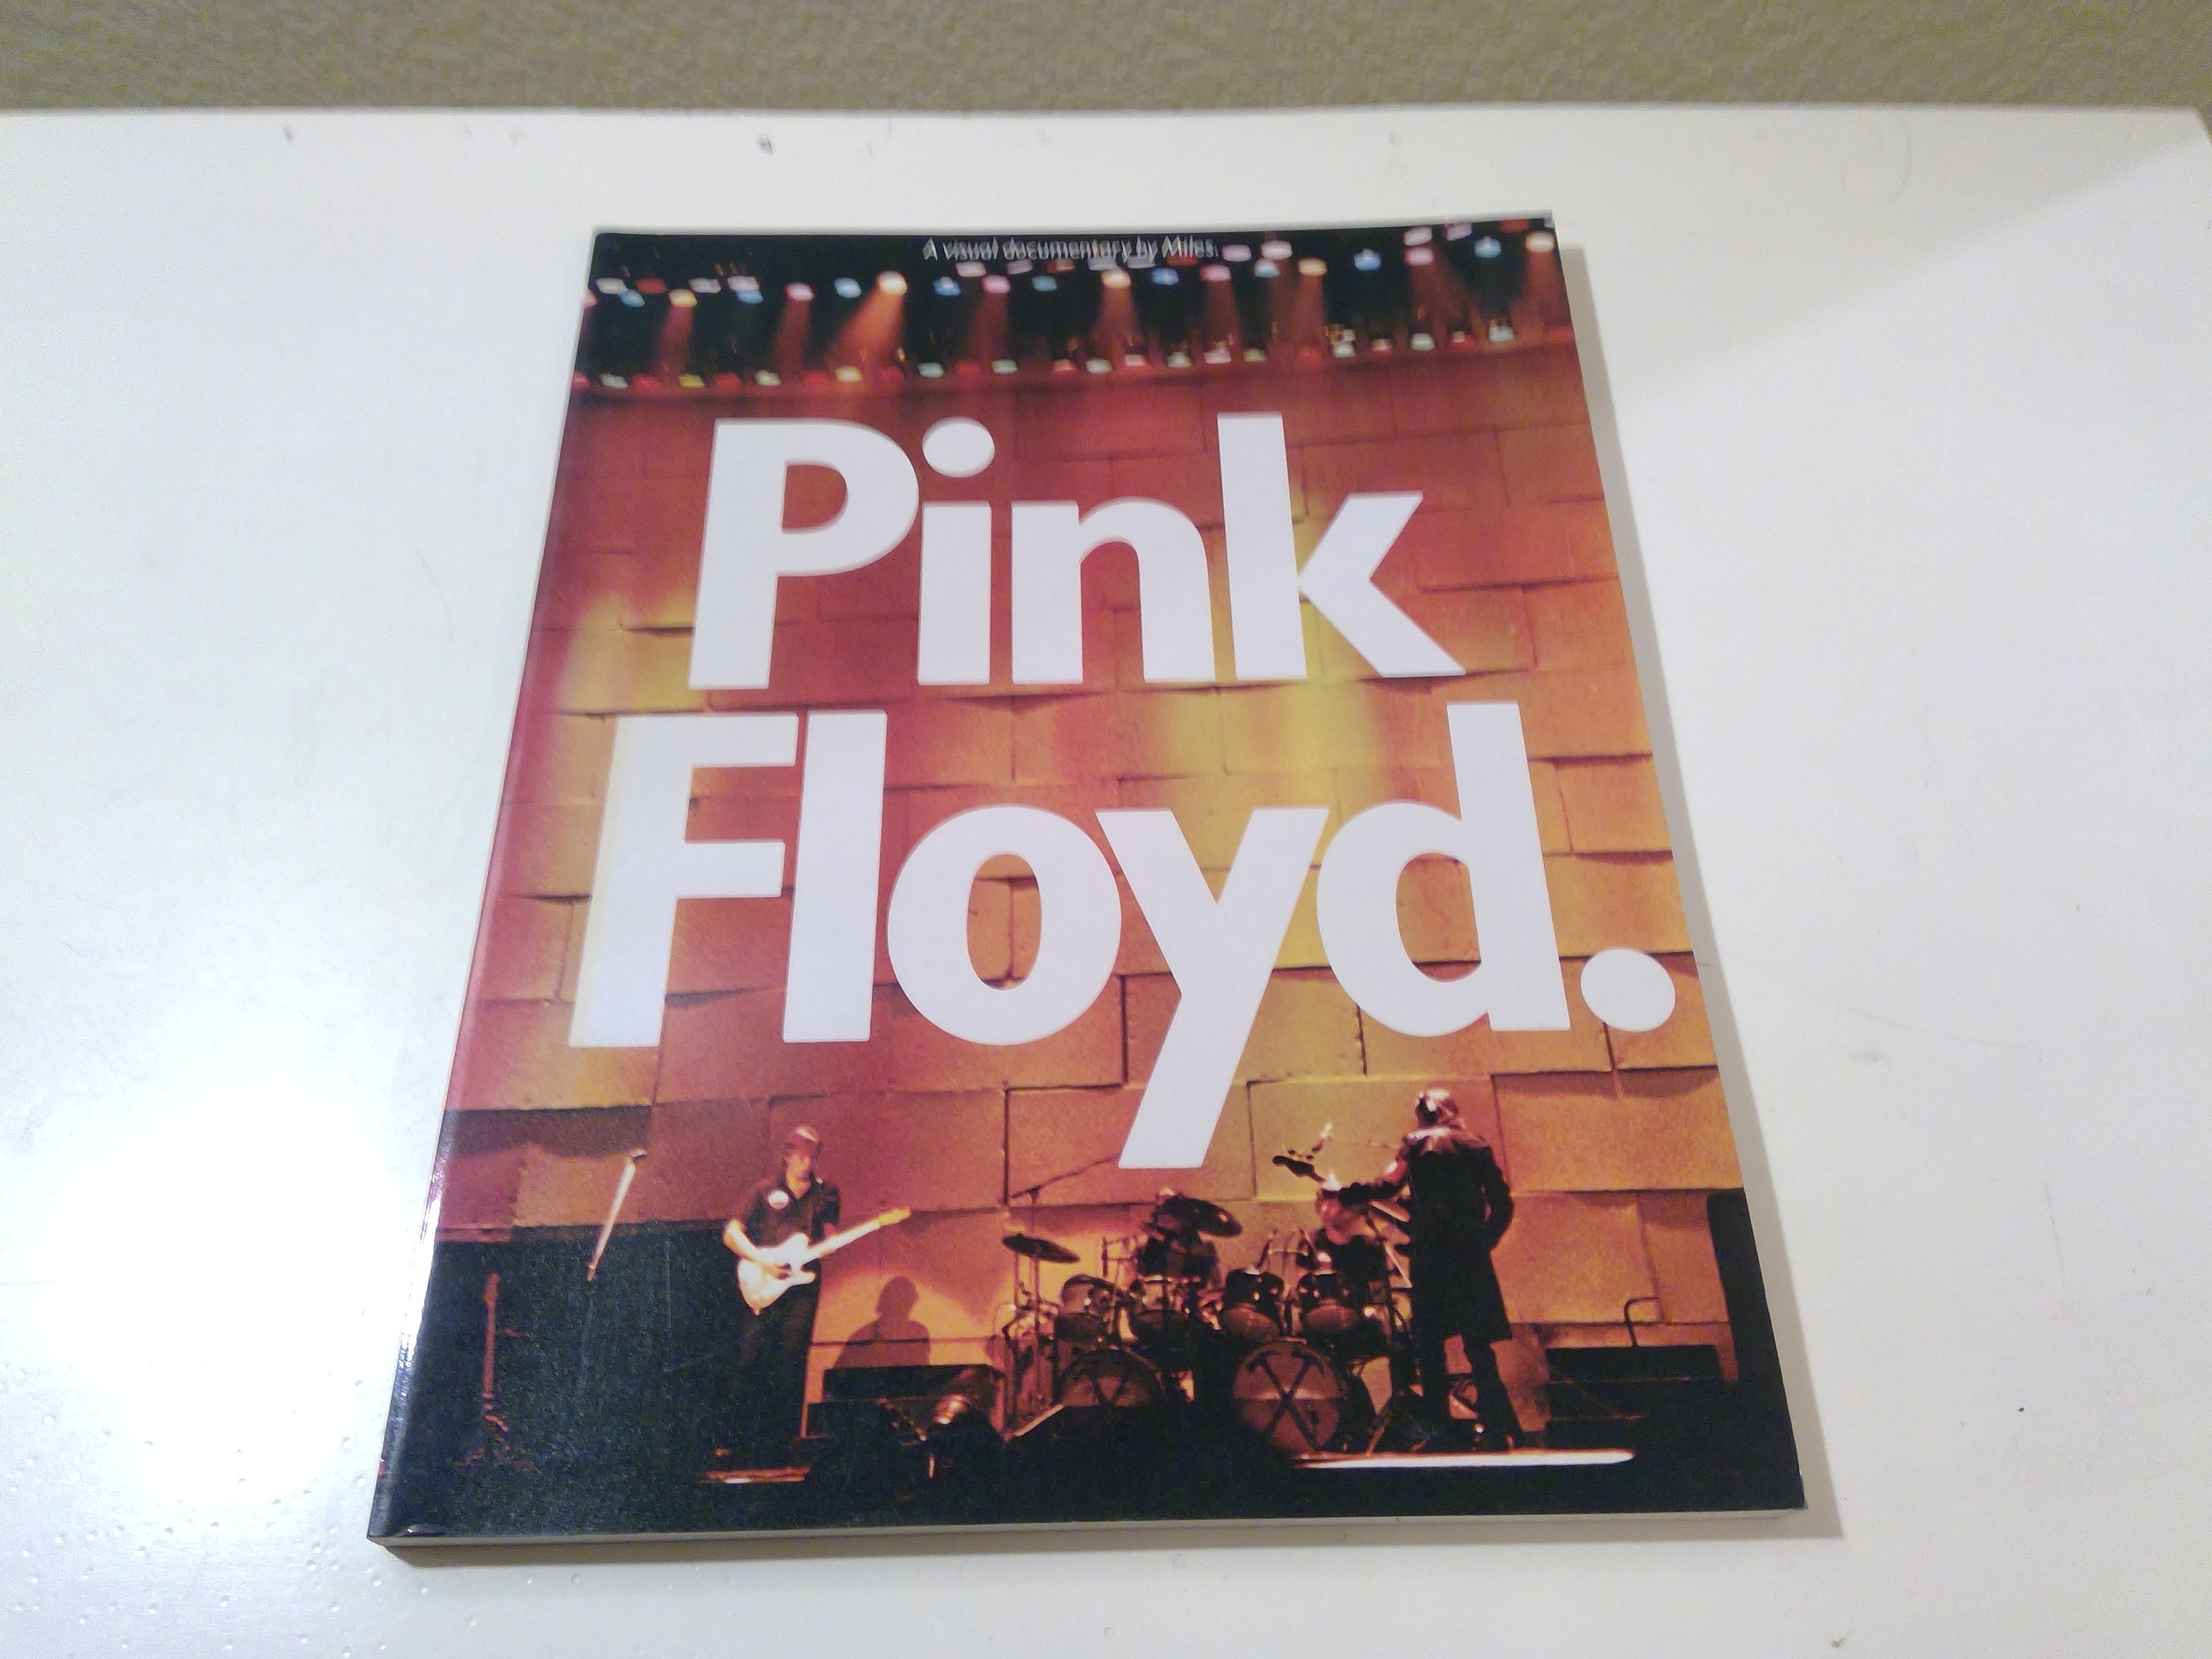 Pink Floyd / A Visual Documentary by Miles Book